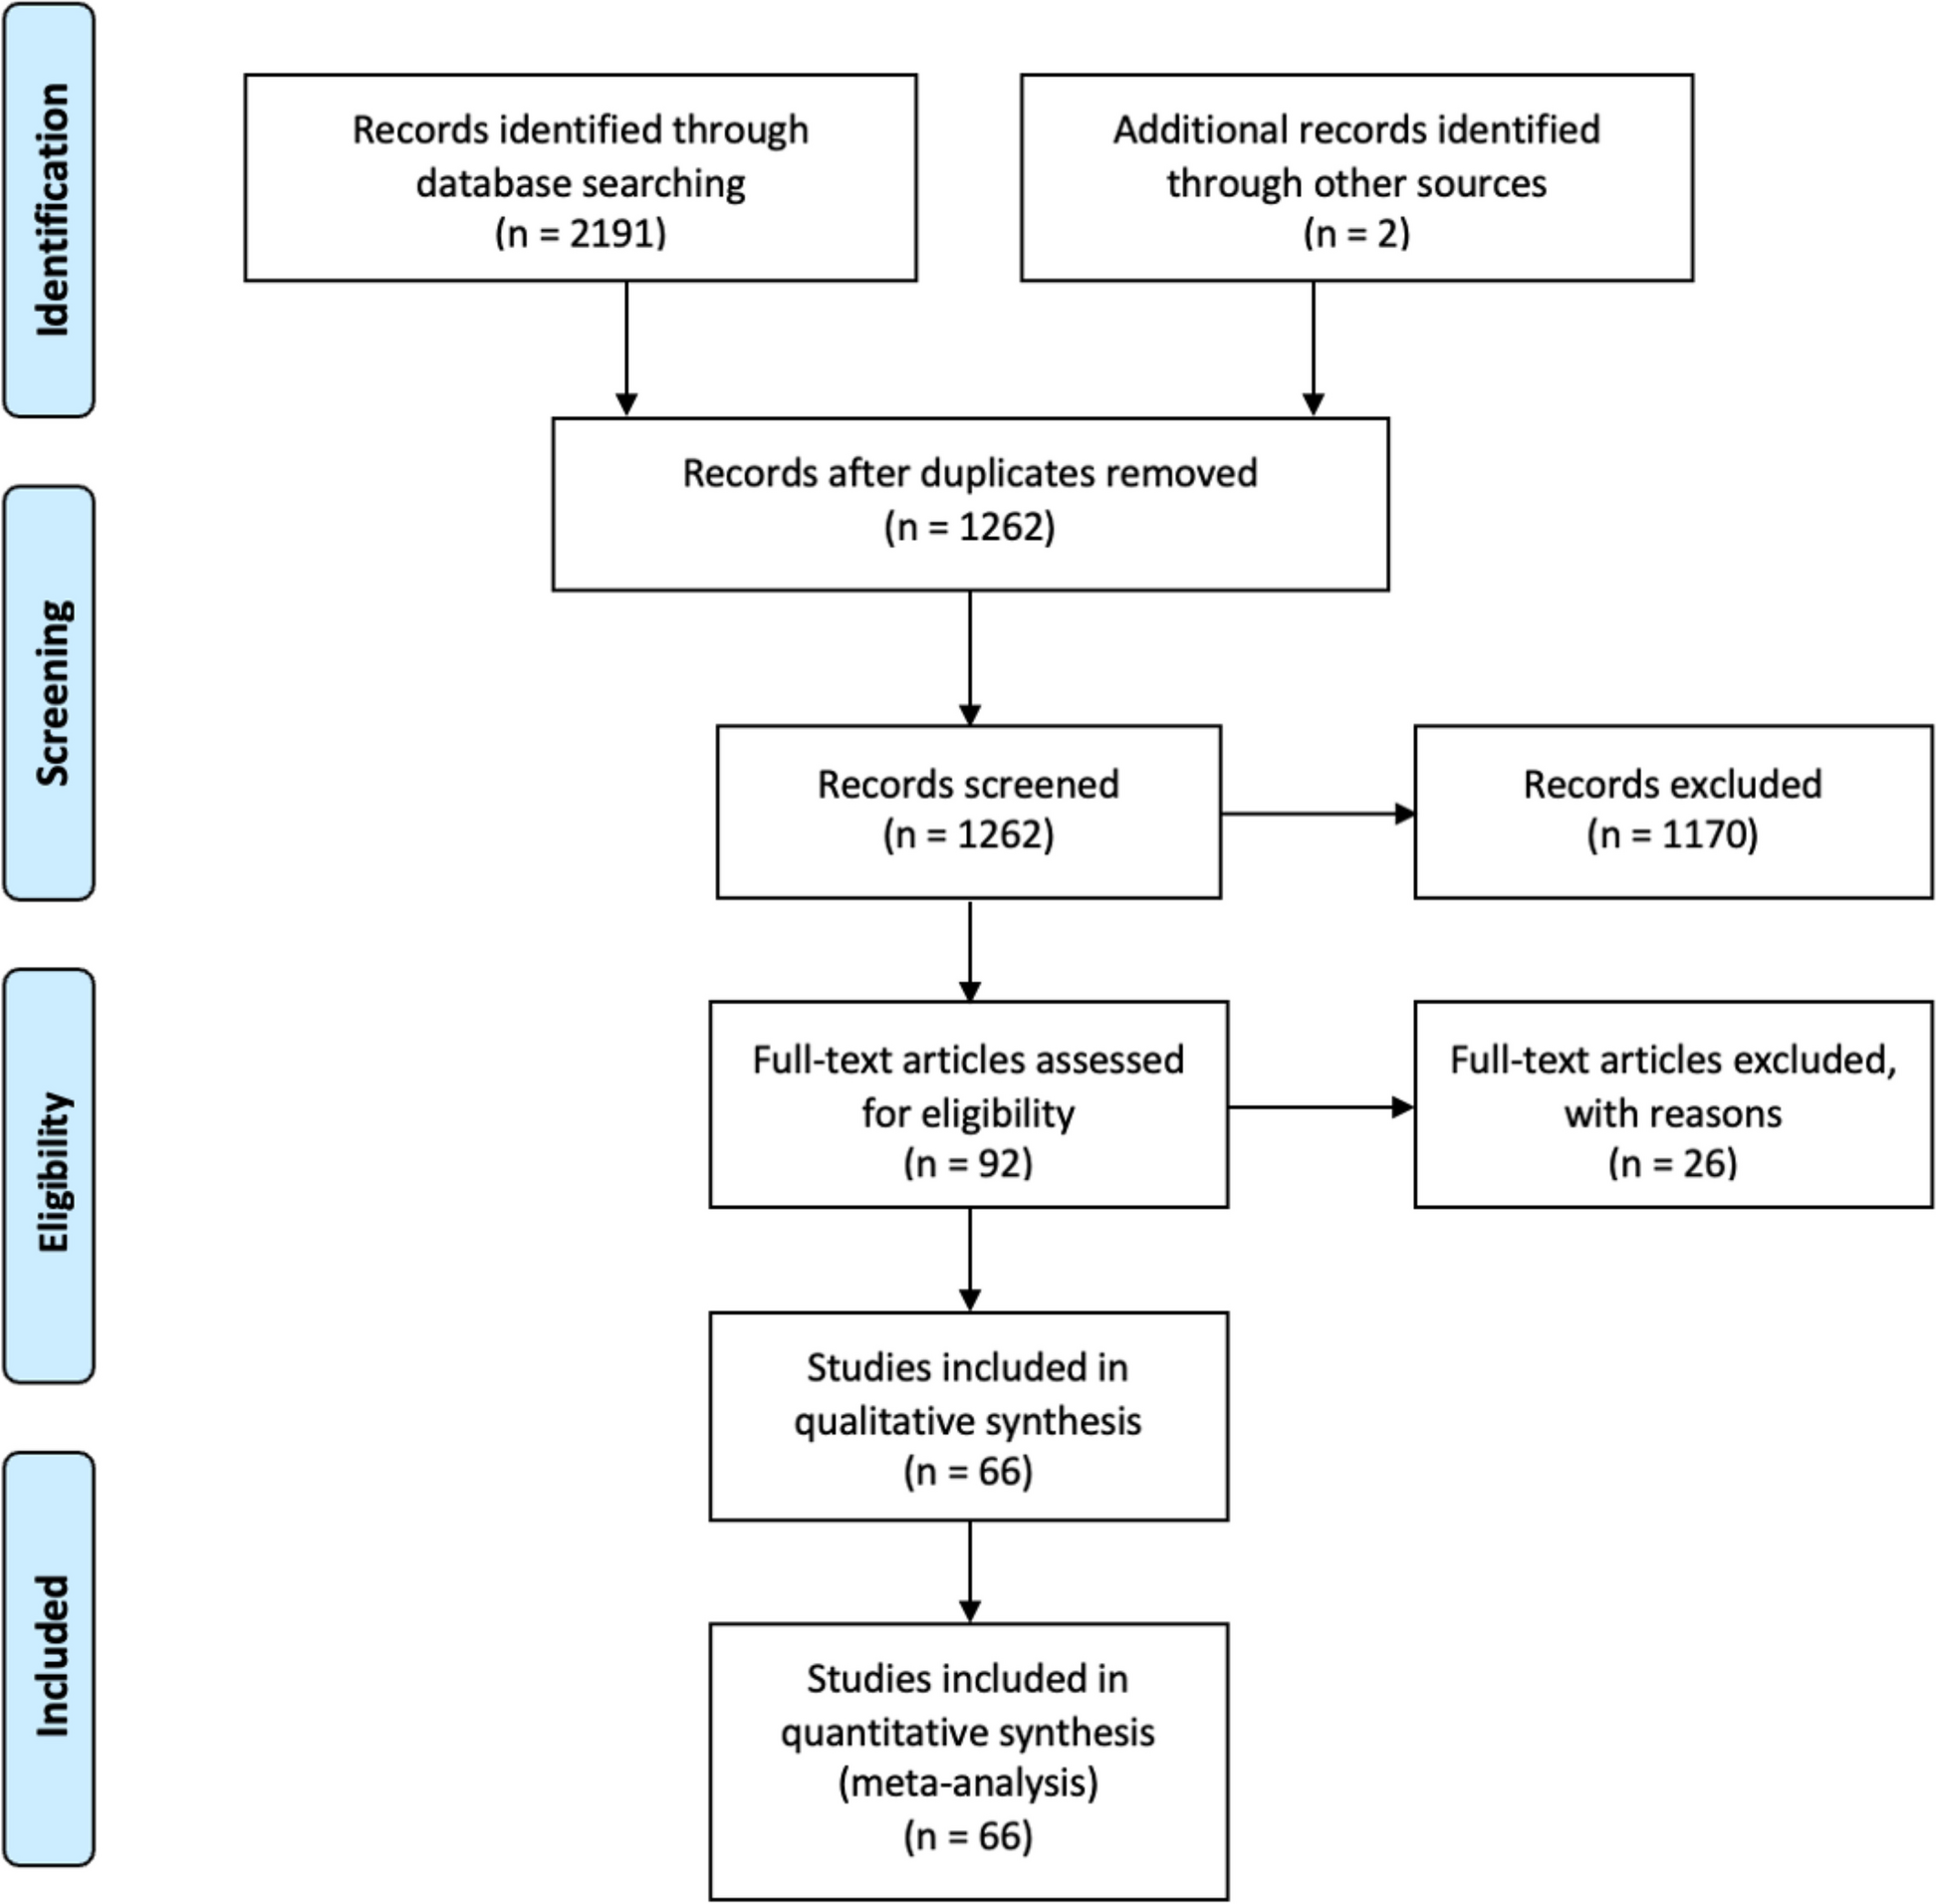 Hypothyroidism after hemithyroidectomy: a systematic review and meta-analysis